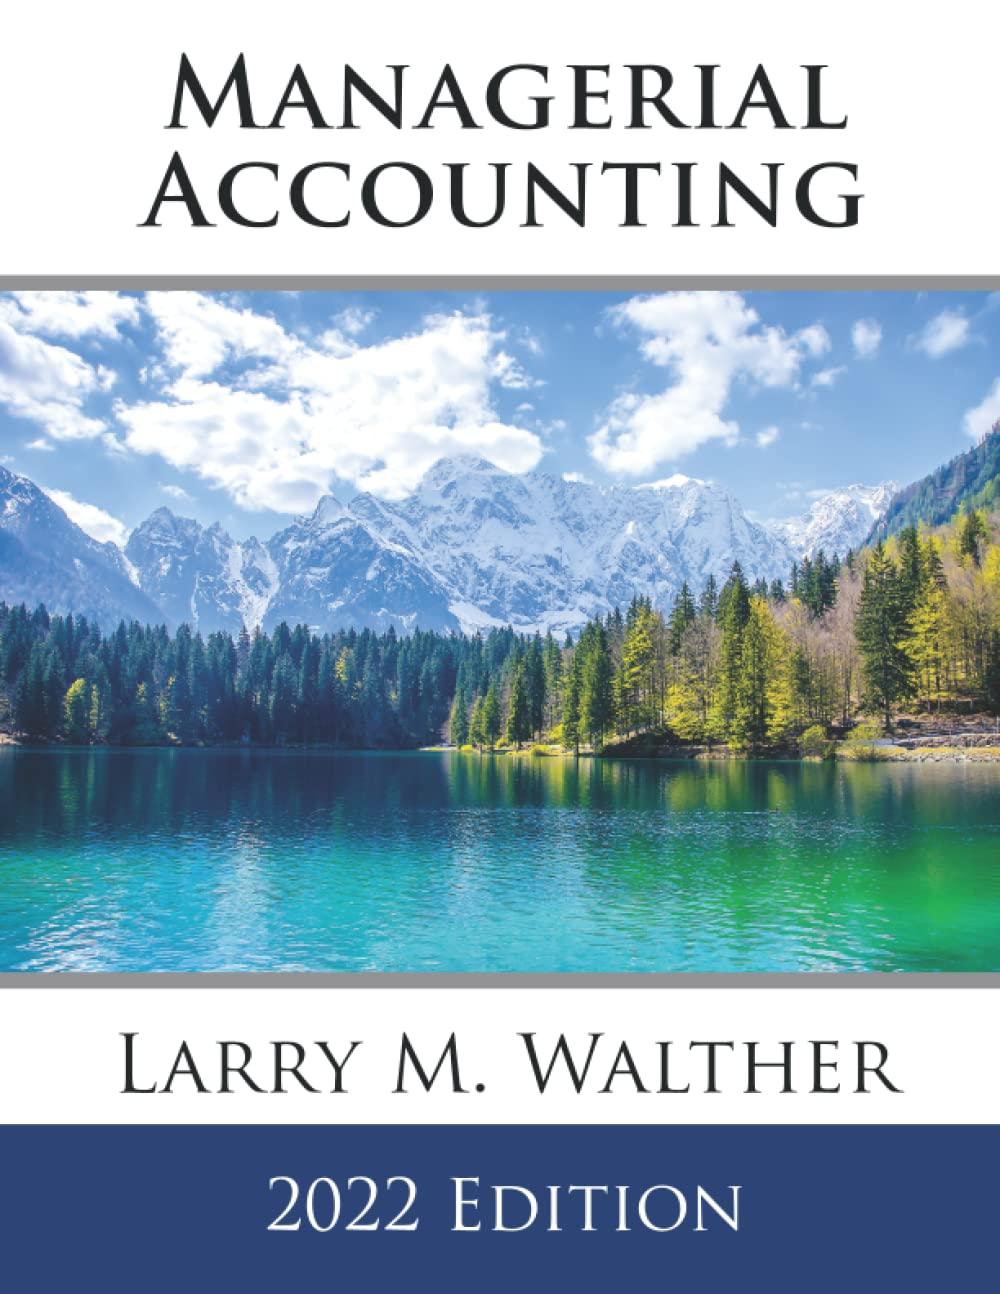 managerial accounting 2022 edition larry m. walther 8409037918, 979-8409037918